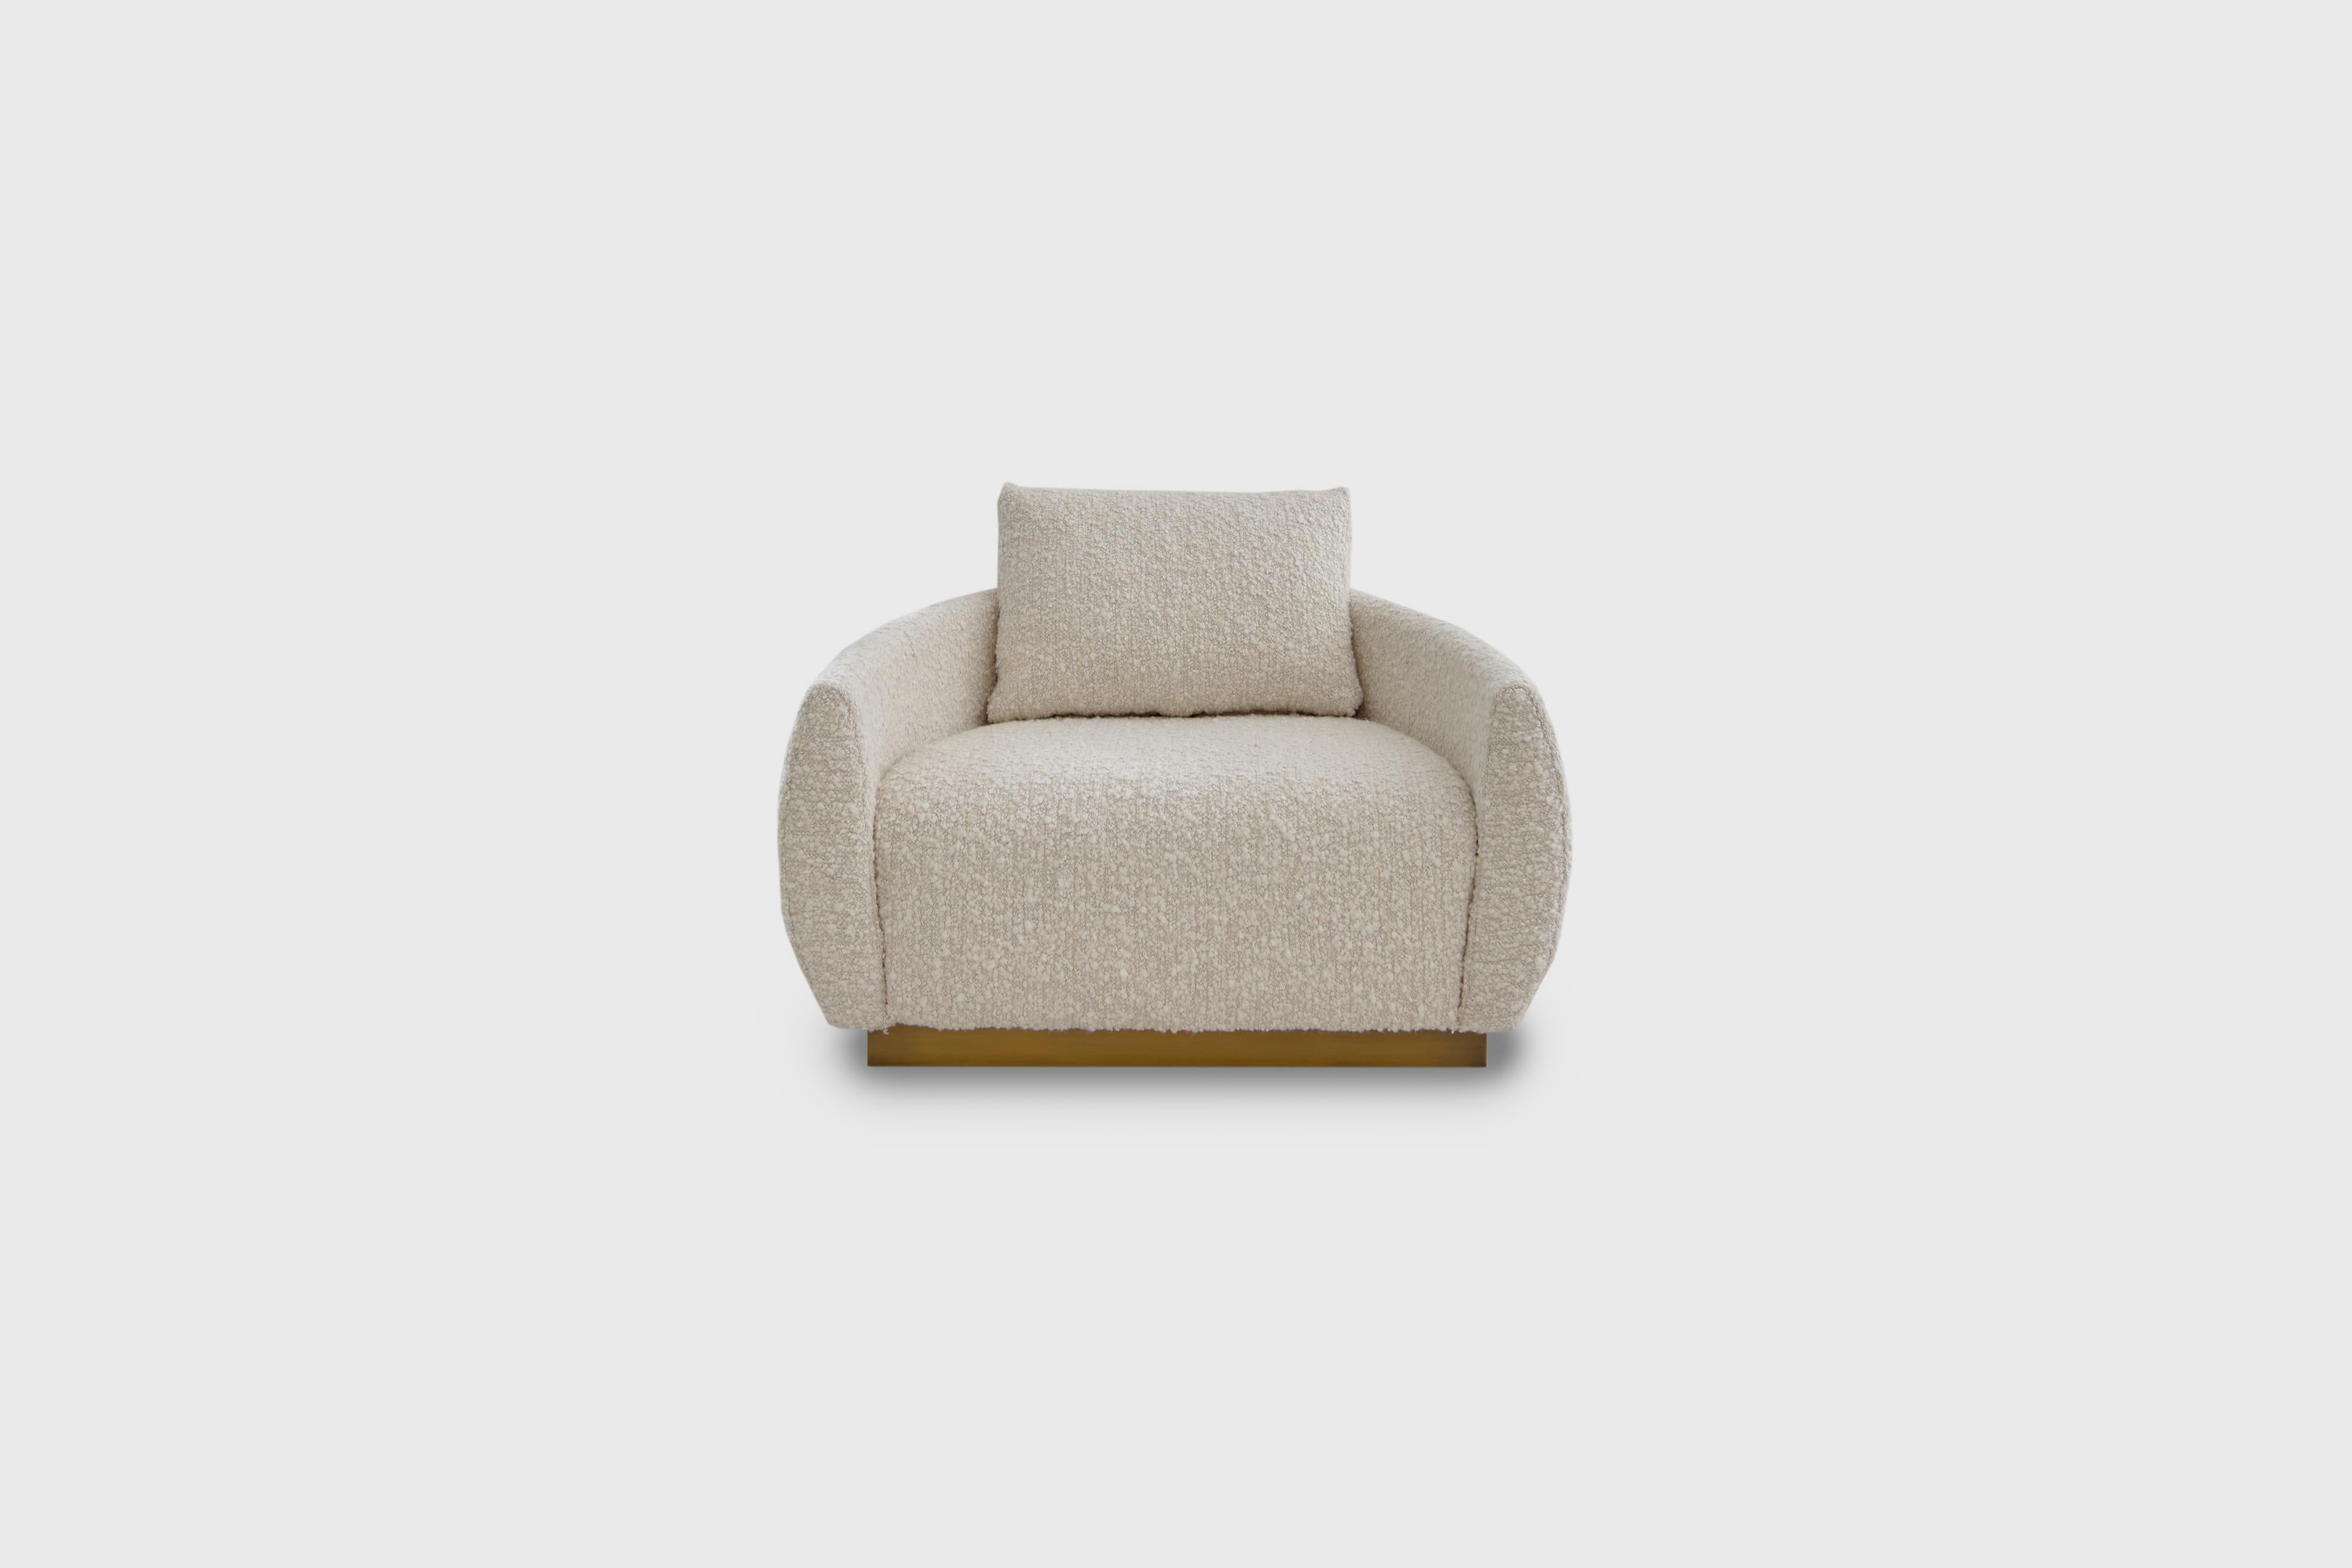 Egge lounge chair by Atra Design
Dimensions: D 83.9 x W 105.6 x H 62.9 cm
Materials: boulé fabric, brass

Atra Design
We are Atra, a furniture brand produced by Atra form a mexico city–based high end production facility that also houses our